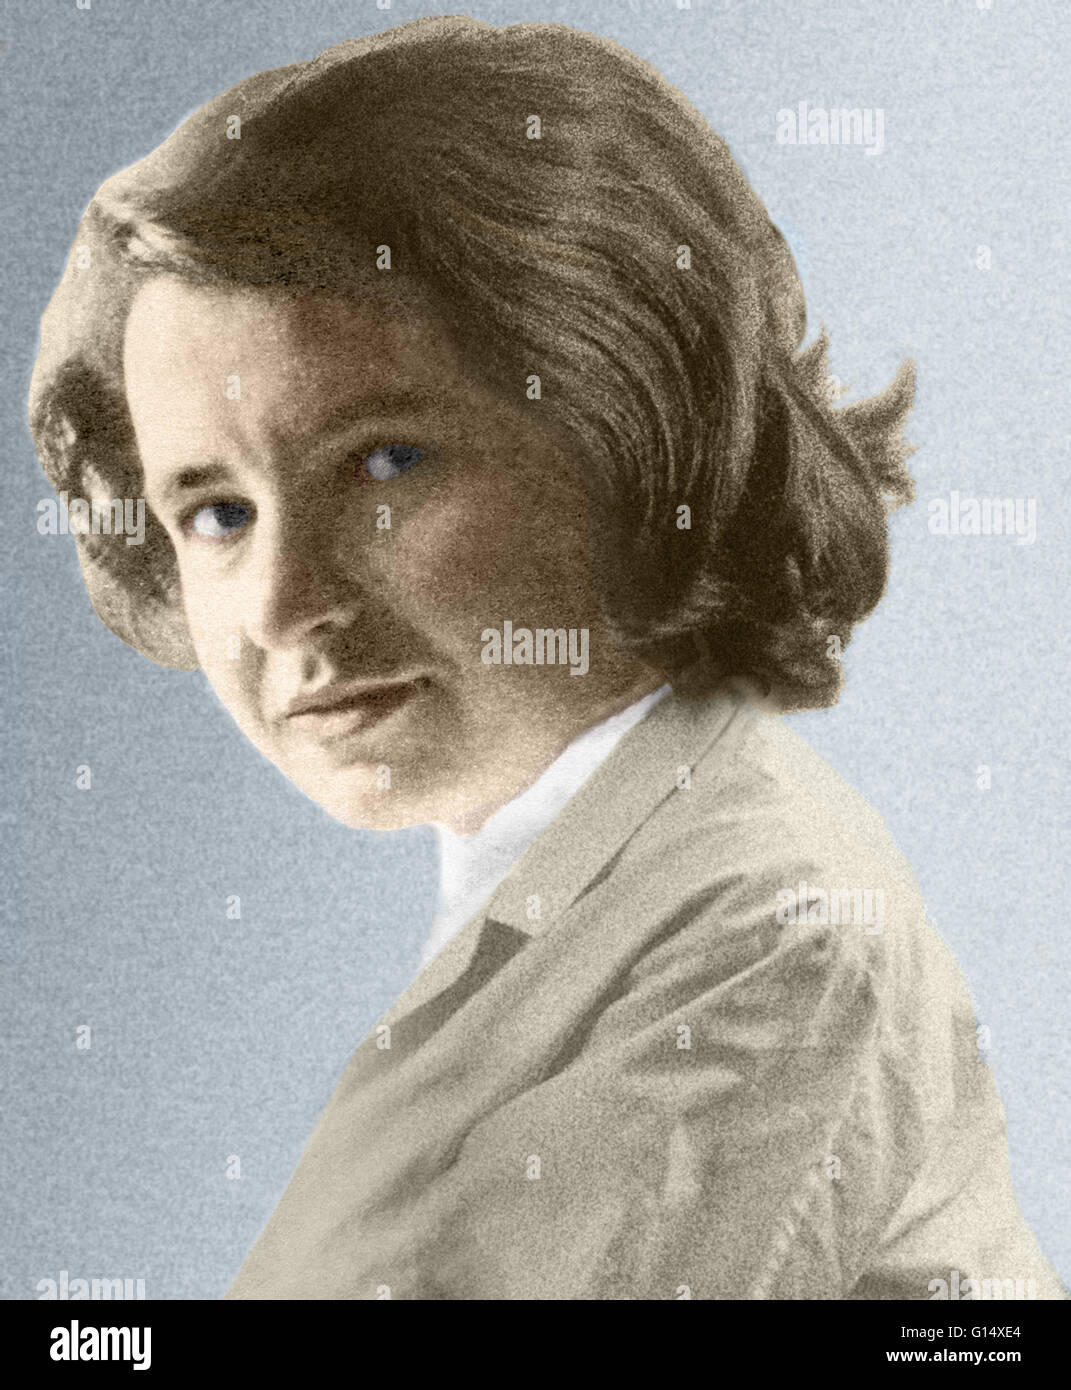 Rosalind Franklin. Portrait of Rosalind Franklin (1920-58), British X-ray crystallographer. Her work producing X-ray images of DNA (Deoxyribonucleic acid) was crucial in the discovery of the structure of DNA by James Watson and Francis Crick. Franklin gra Stock Photo